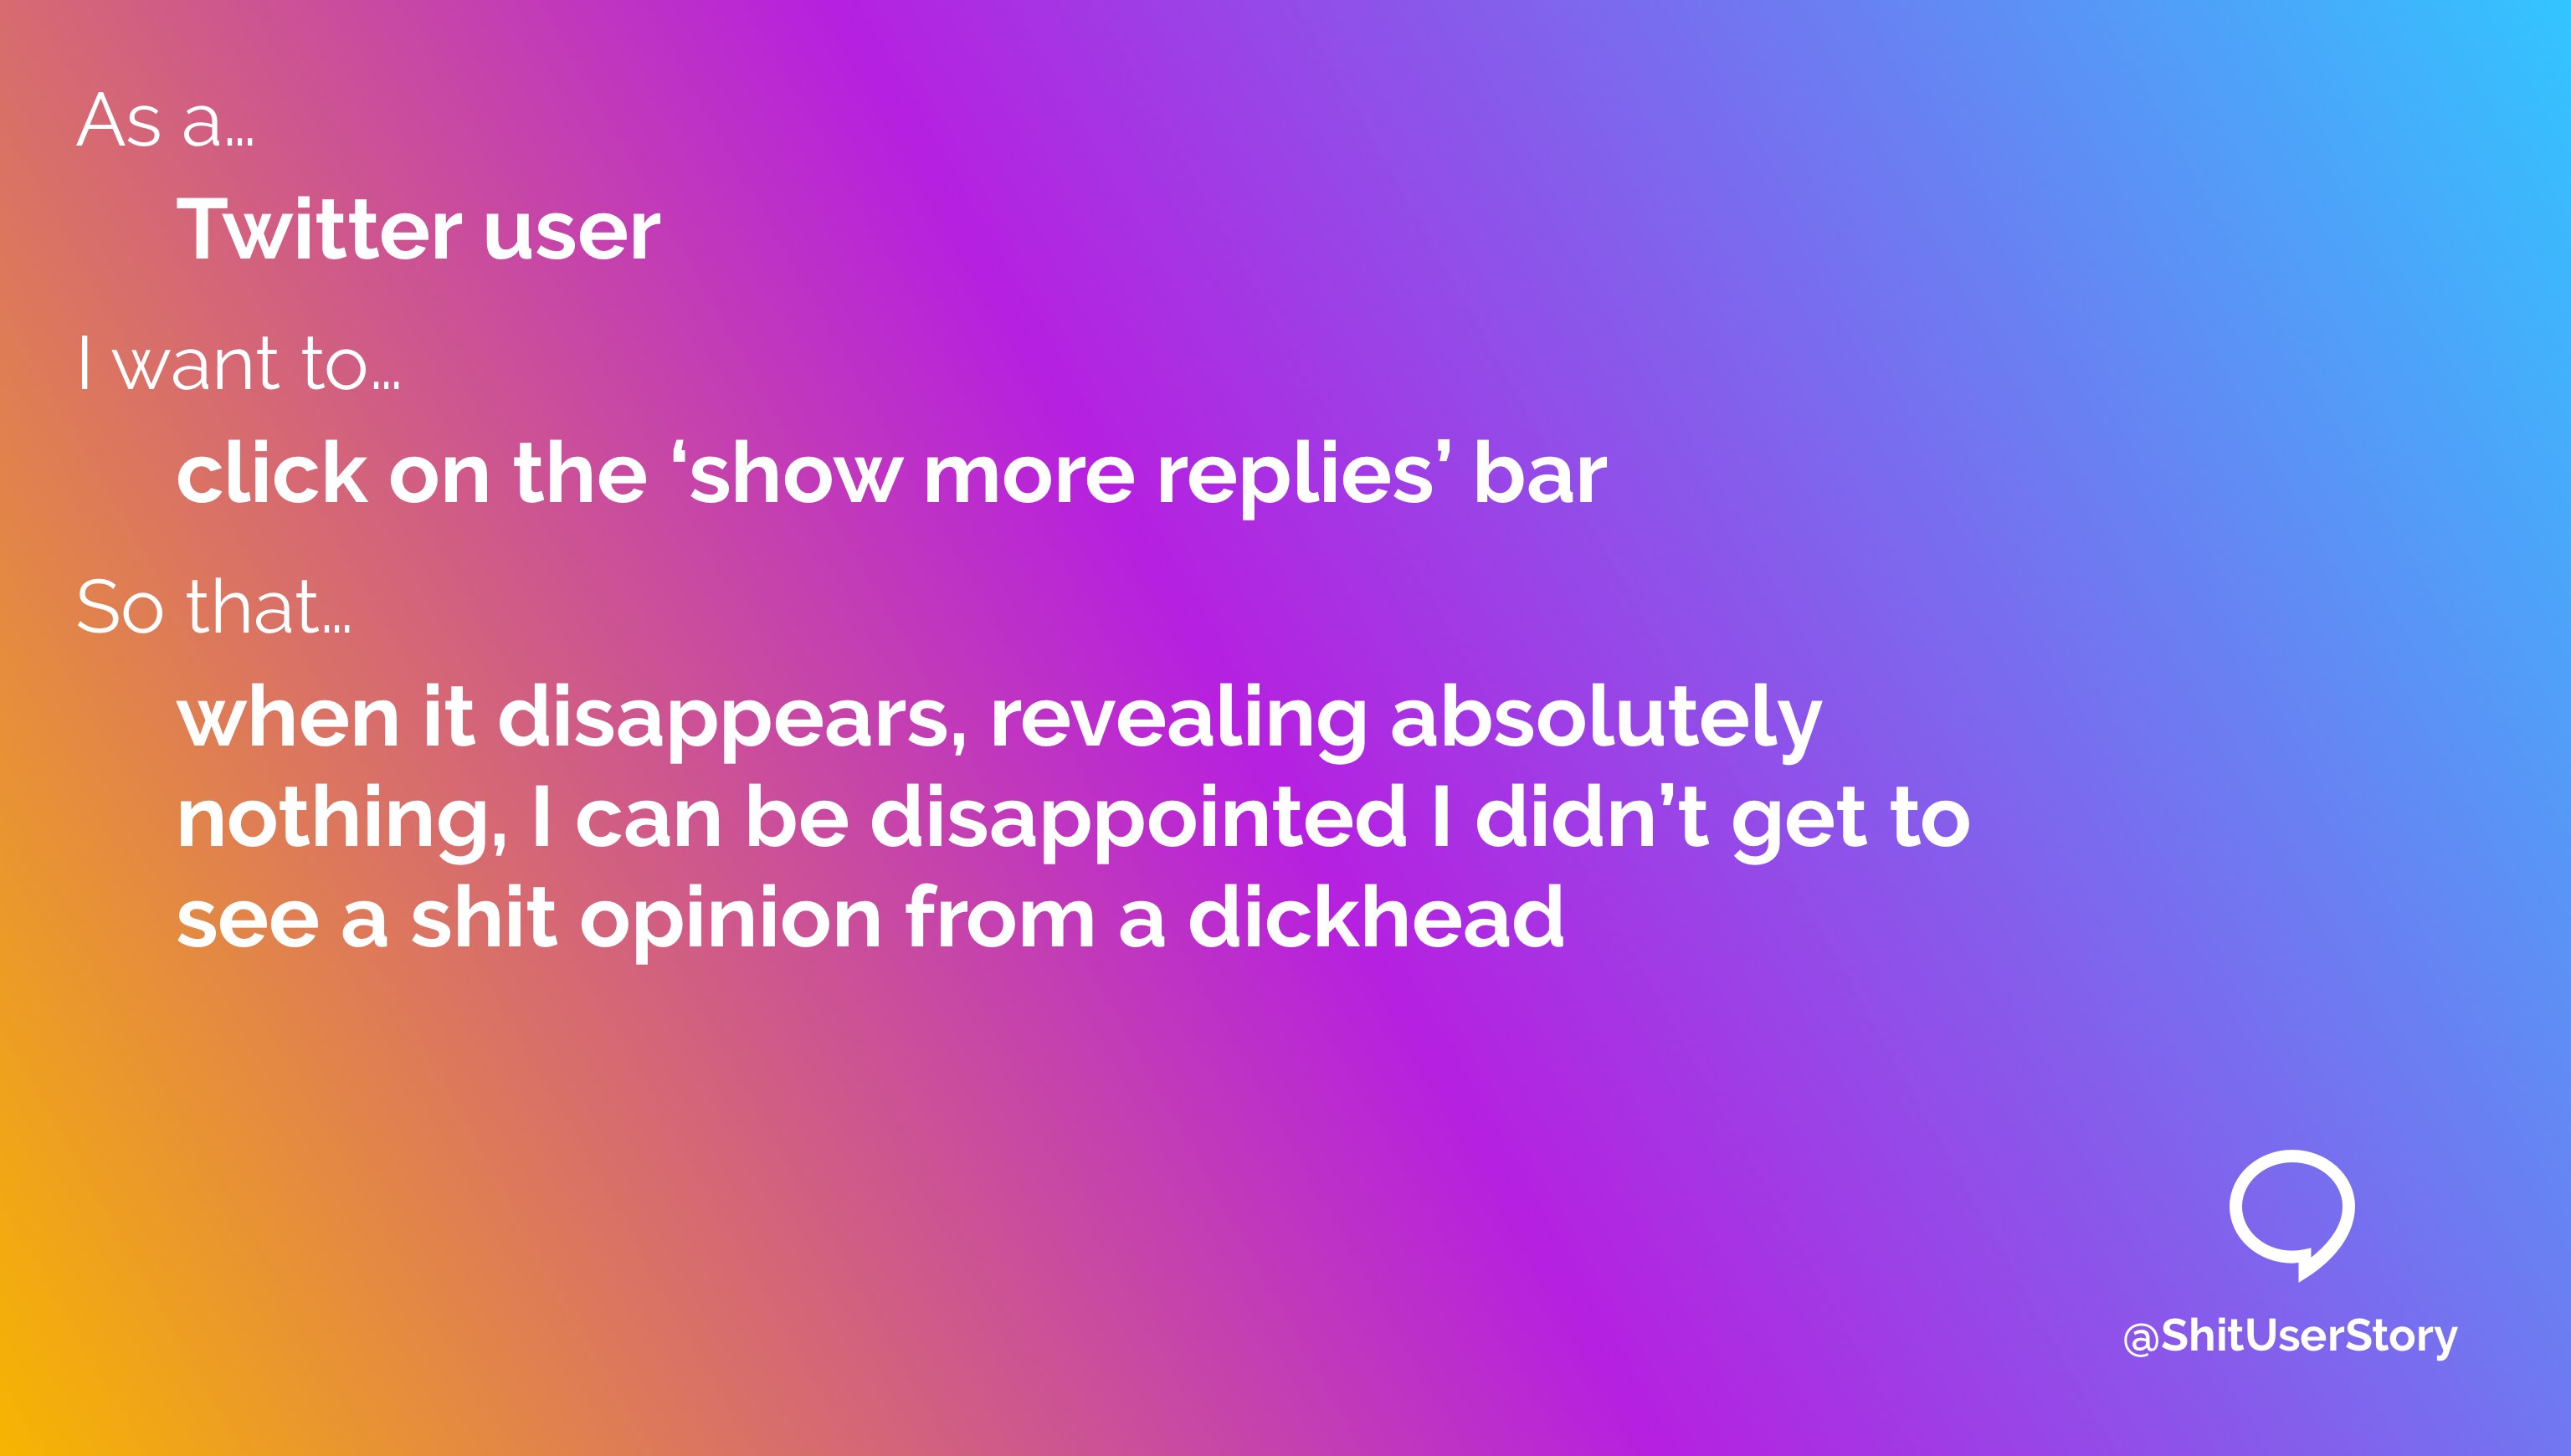 ShitUserStory: Twitter, show more replies